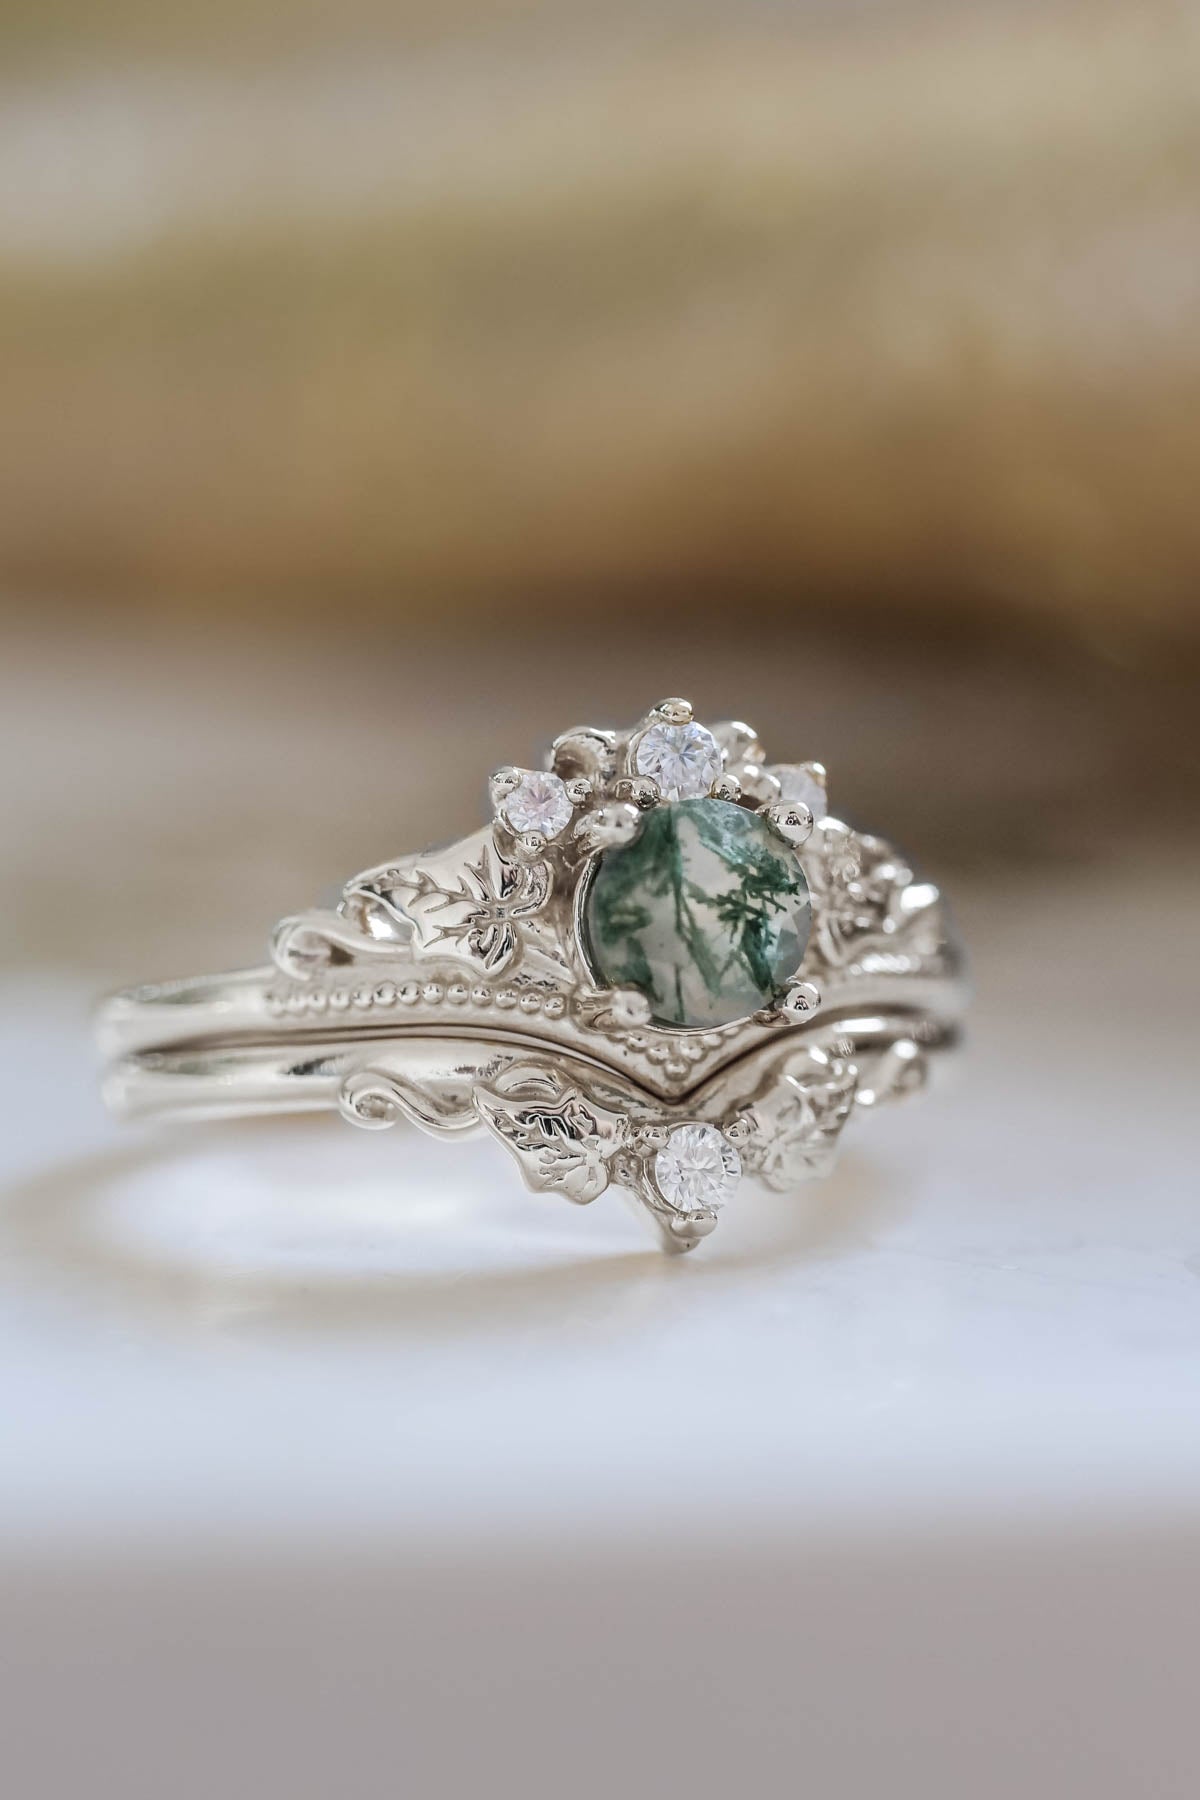 READY TO SHIP: Ariadne bridal ring set in 14K or 18K white gold, natural moss agate 5 mm, accents moissanites, AVAILABLE RING SIZES: 6-11US - Eden Garden Jewelry™